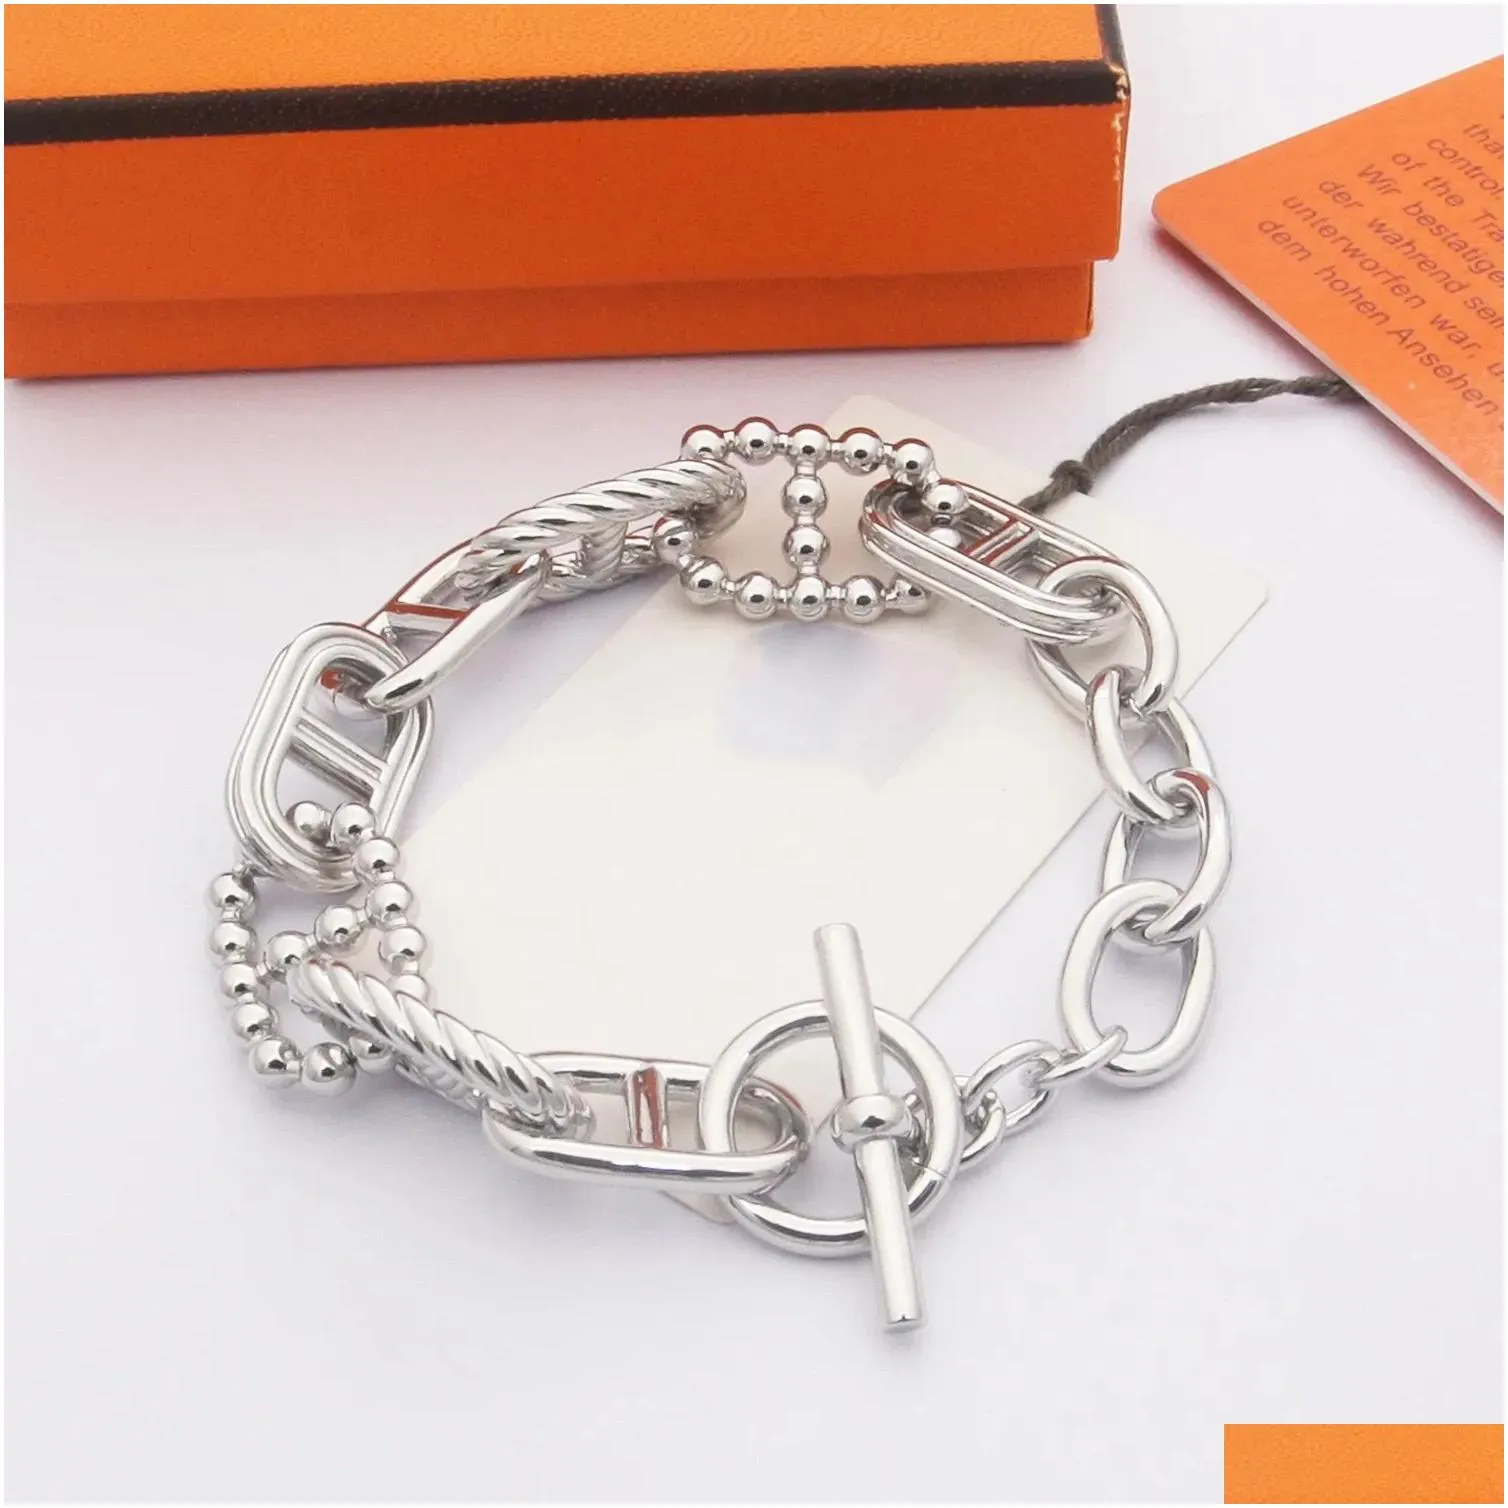 Design Bangle High quality womena nd mens Bracelet Designer jewelry gold buckle Pig Nose Bracelets stainless steel men and woman fashion Jewelry Bangles With